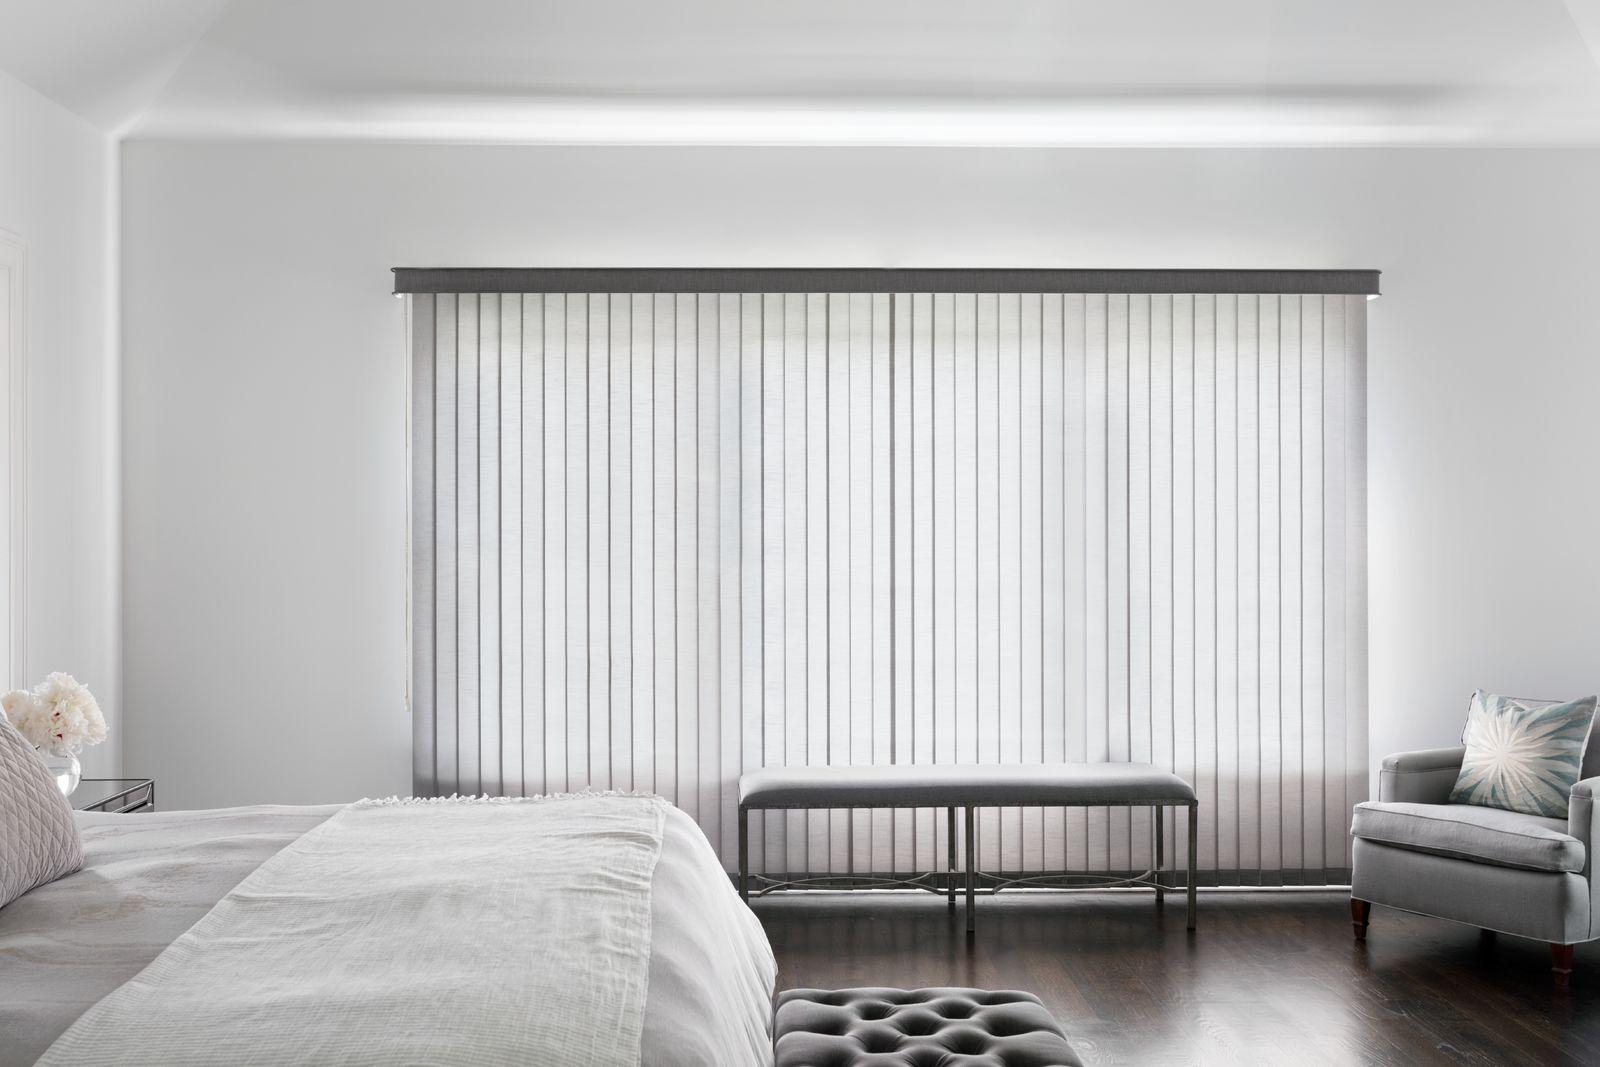 Used: Energy-efficient, light-filtering fabric vertical blinds gently diffuse sunlight coming in a bedroom's large window.